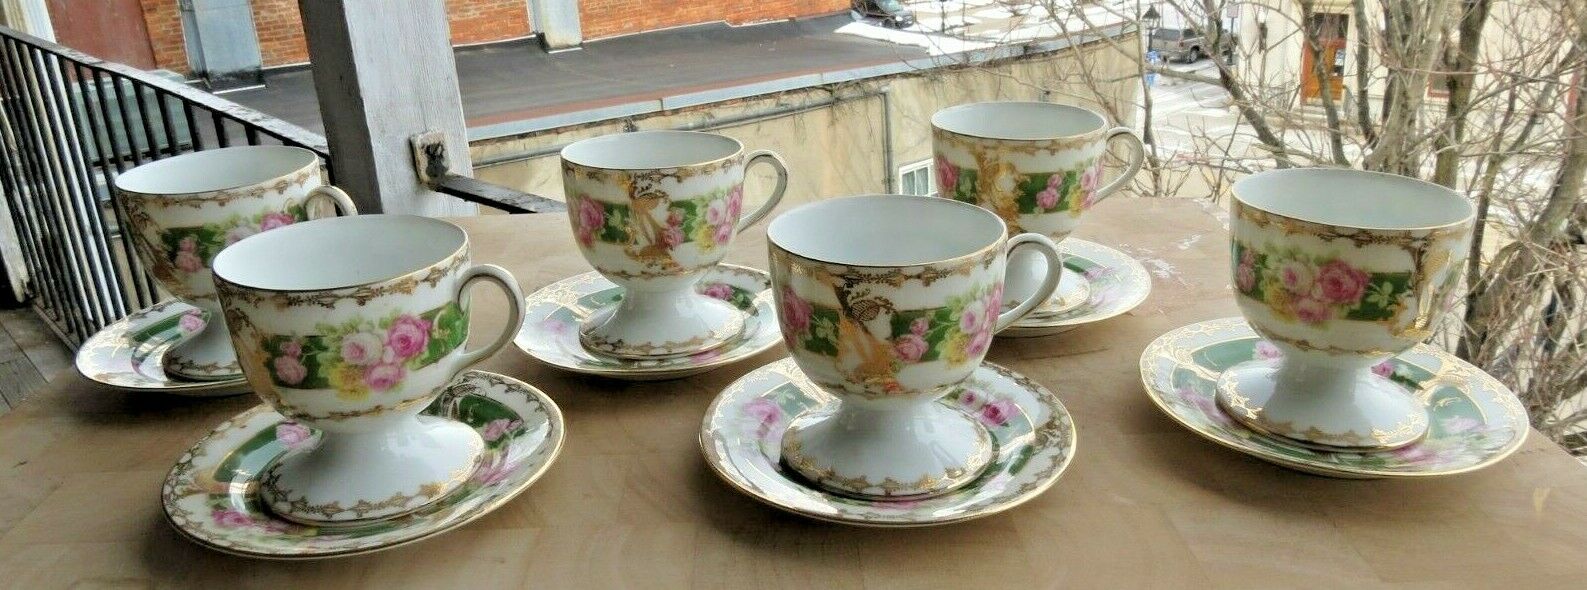 6 Vintage Antique Double NE@T Cups Style Tea Cups Pink, Green Gold Gilt Saucer